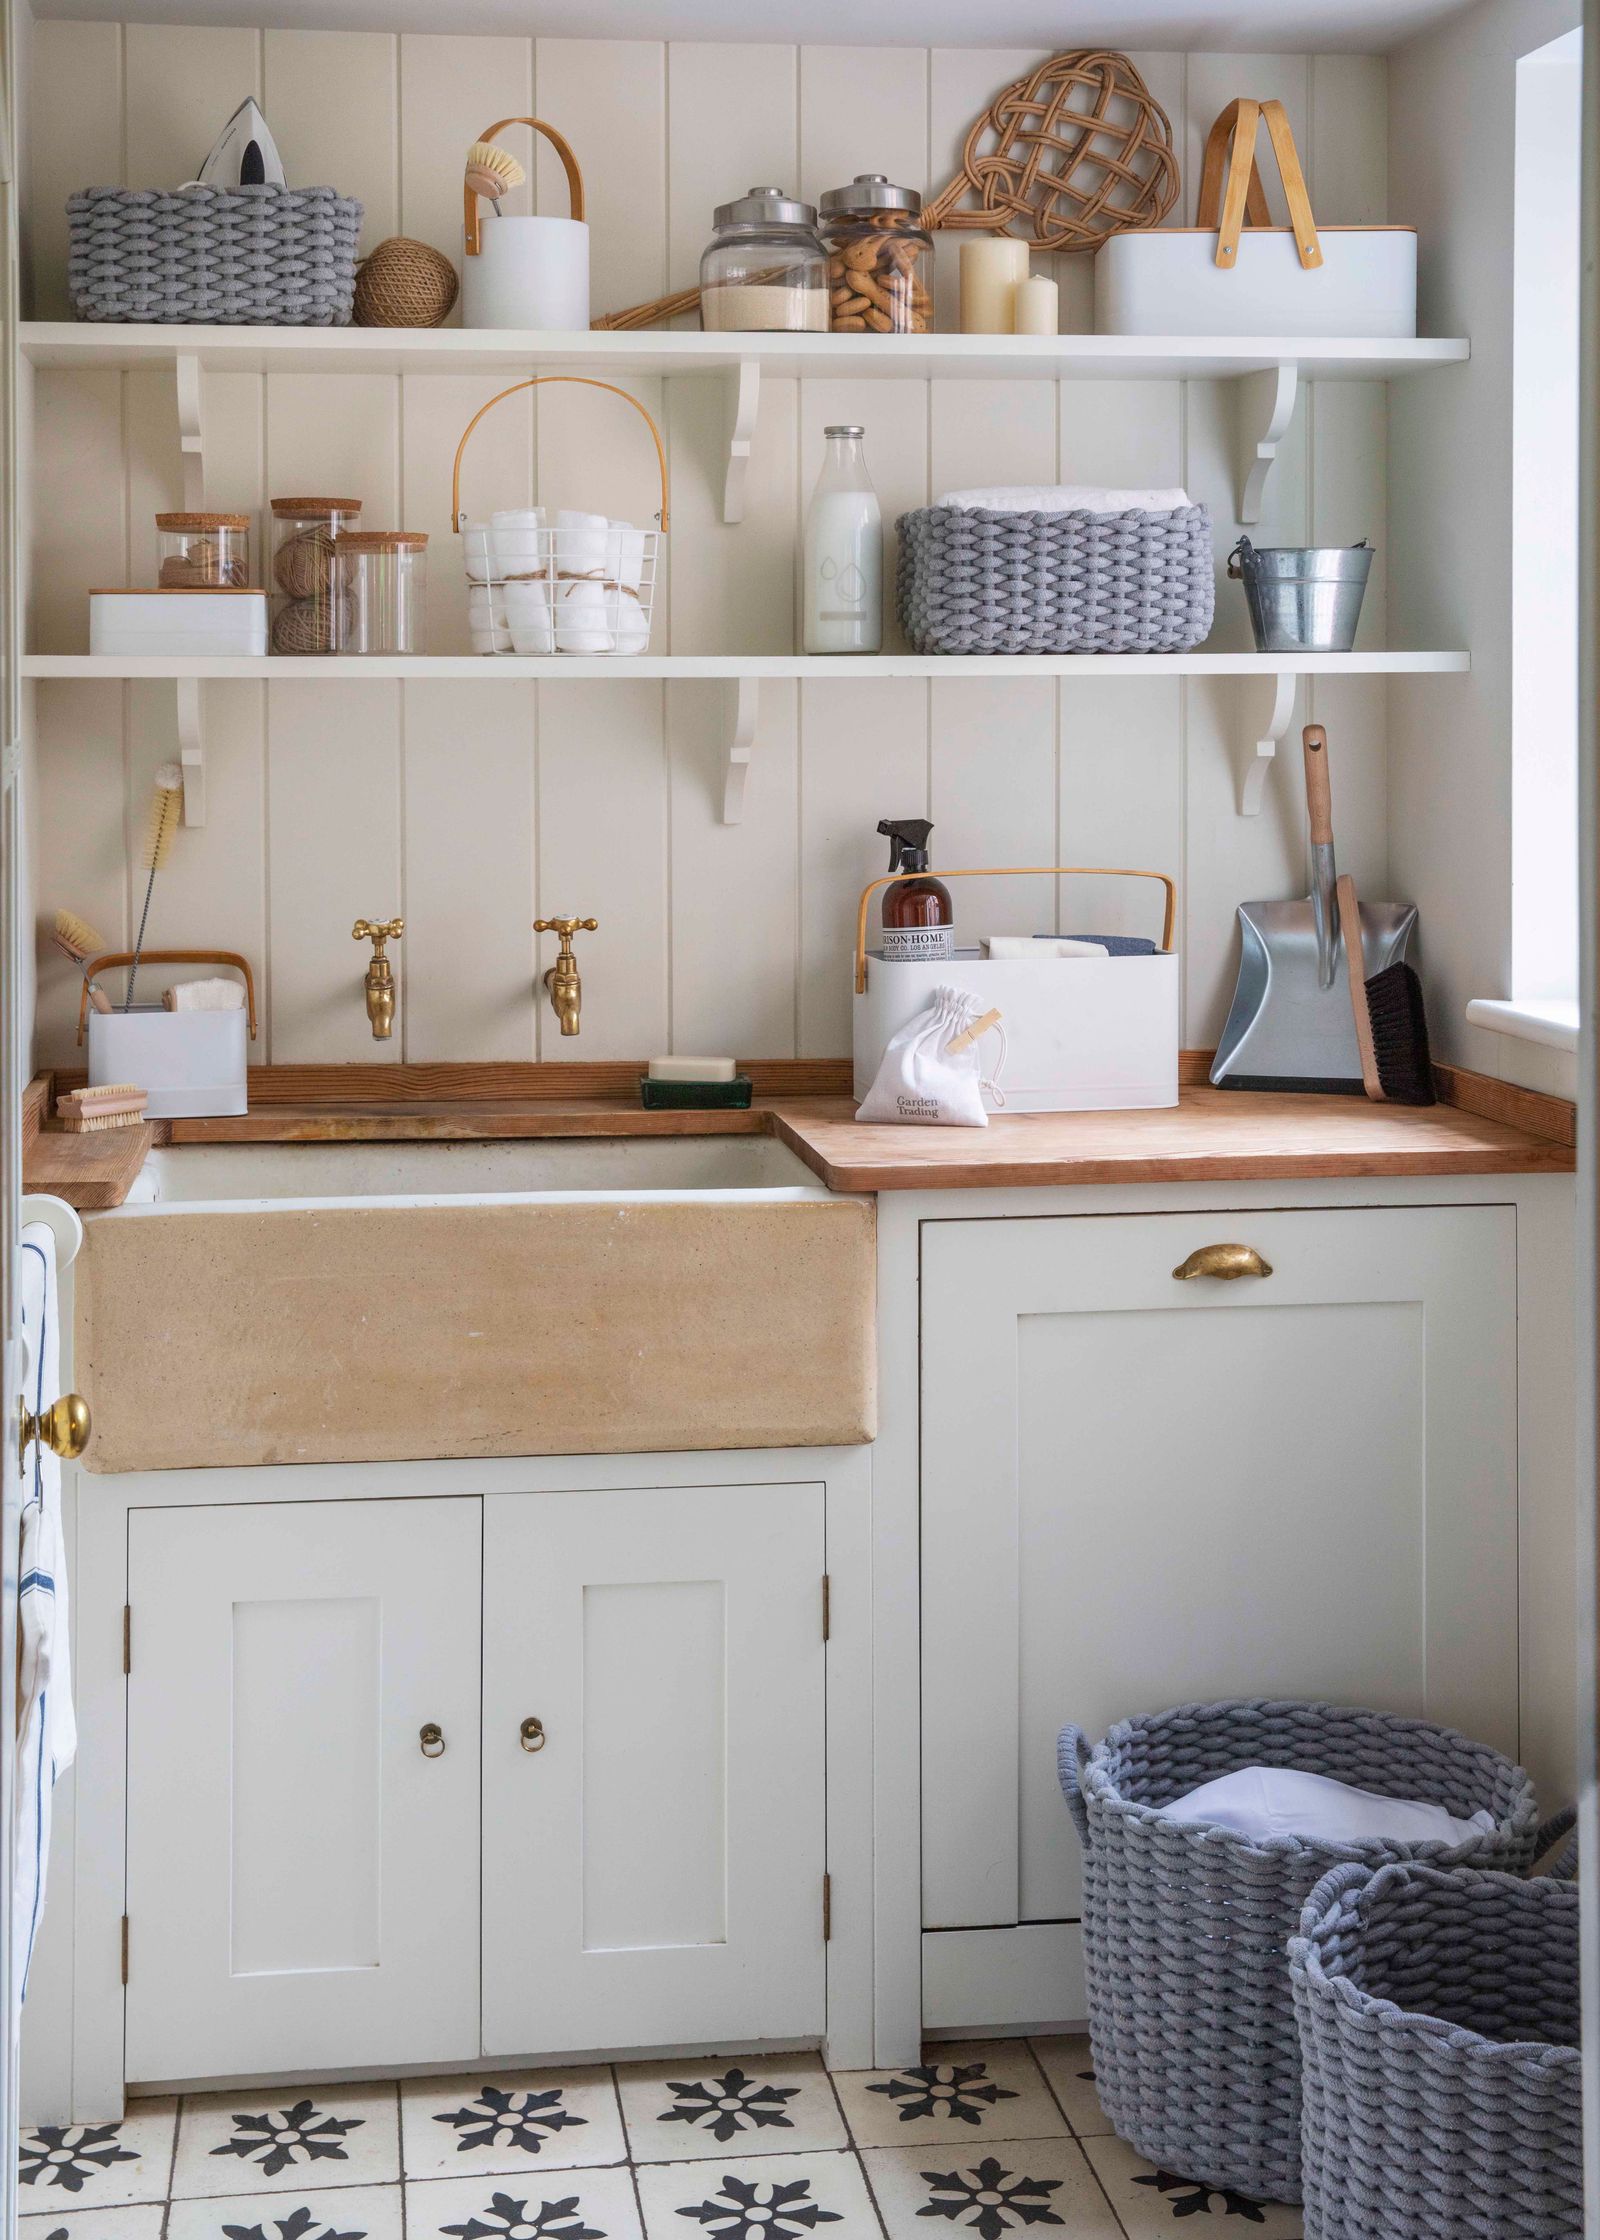 Small laundry room ideas: 19 compact designs to save space